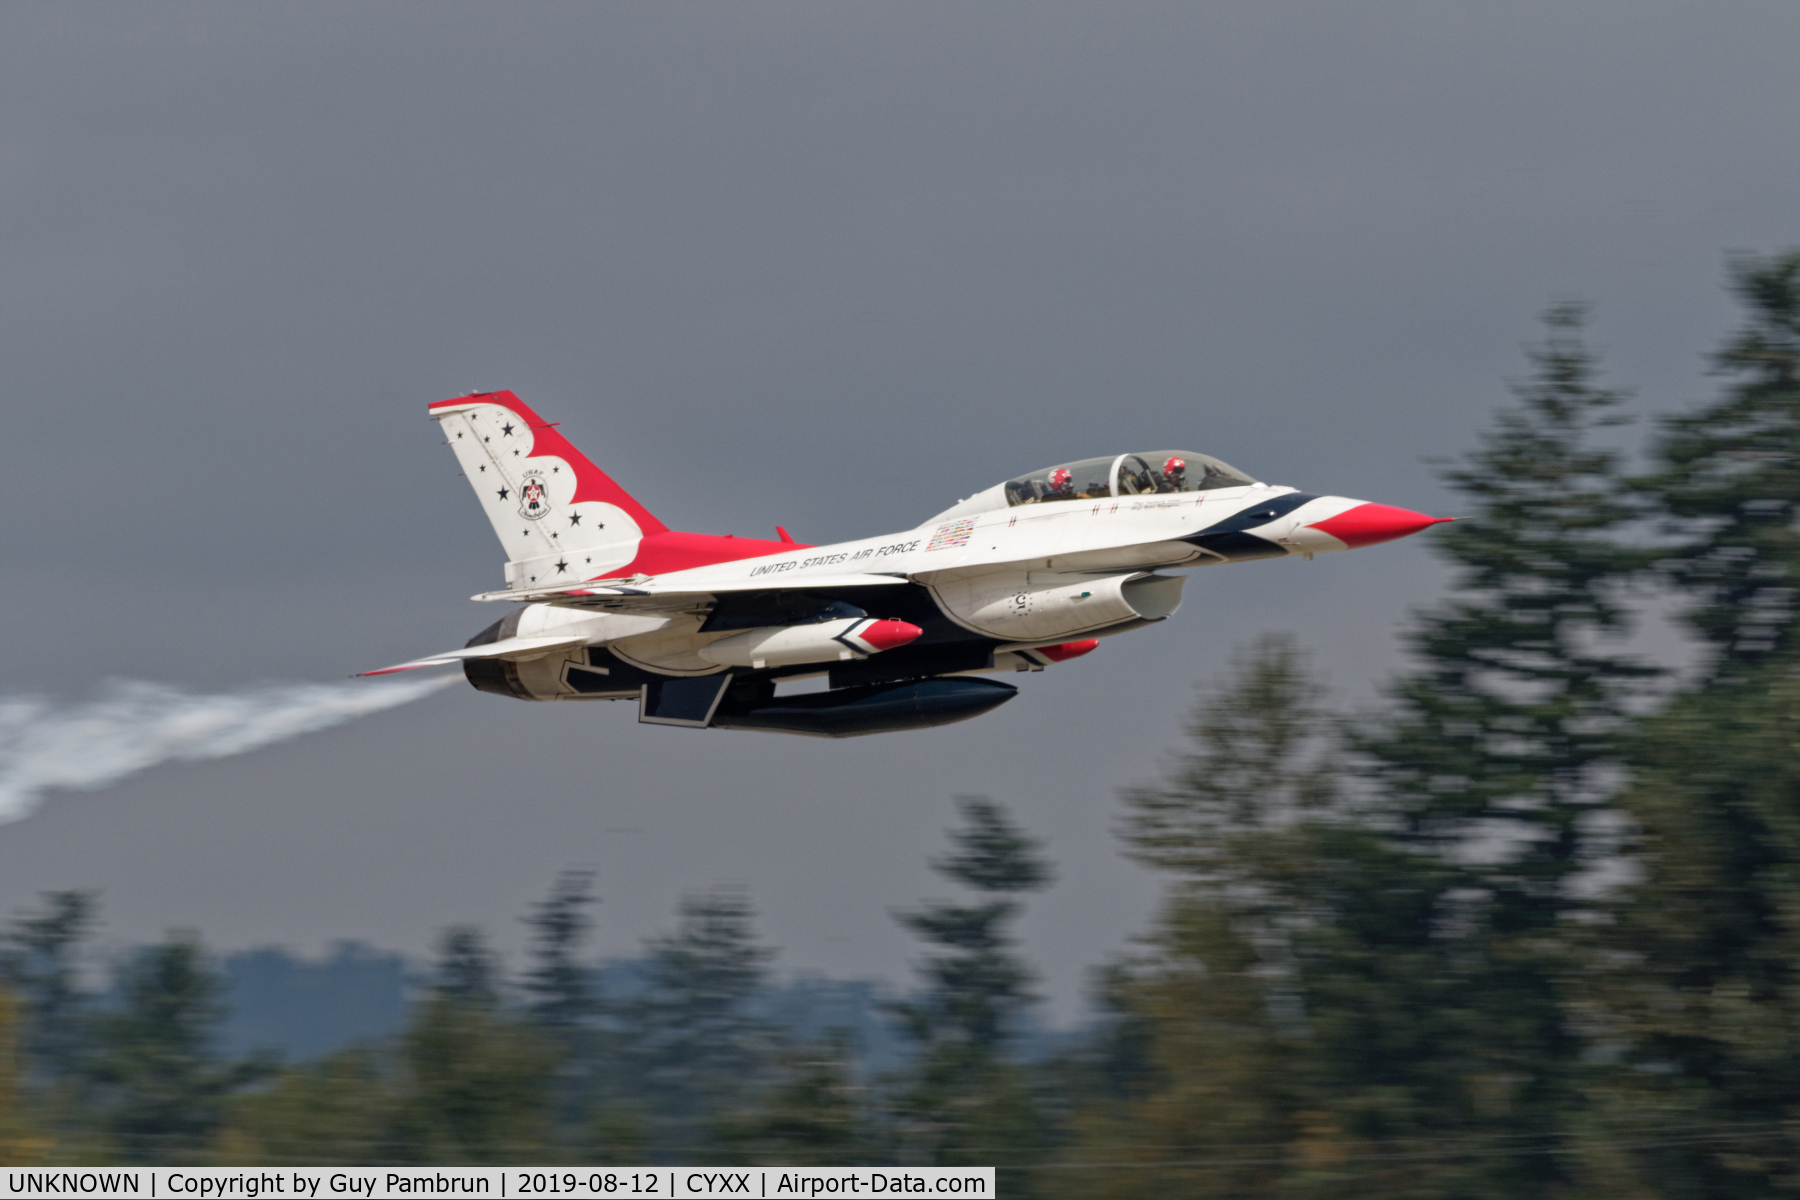 UNKNOWN, General Dynamics F-16C Fighting Falcon C/N Unknown, Departing Abbotsford Airshow 2019